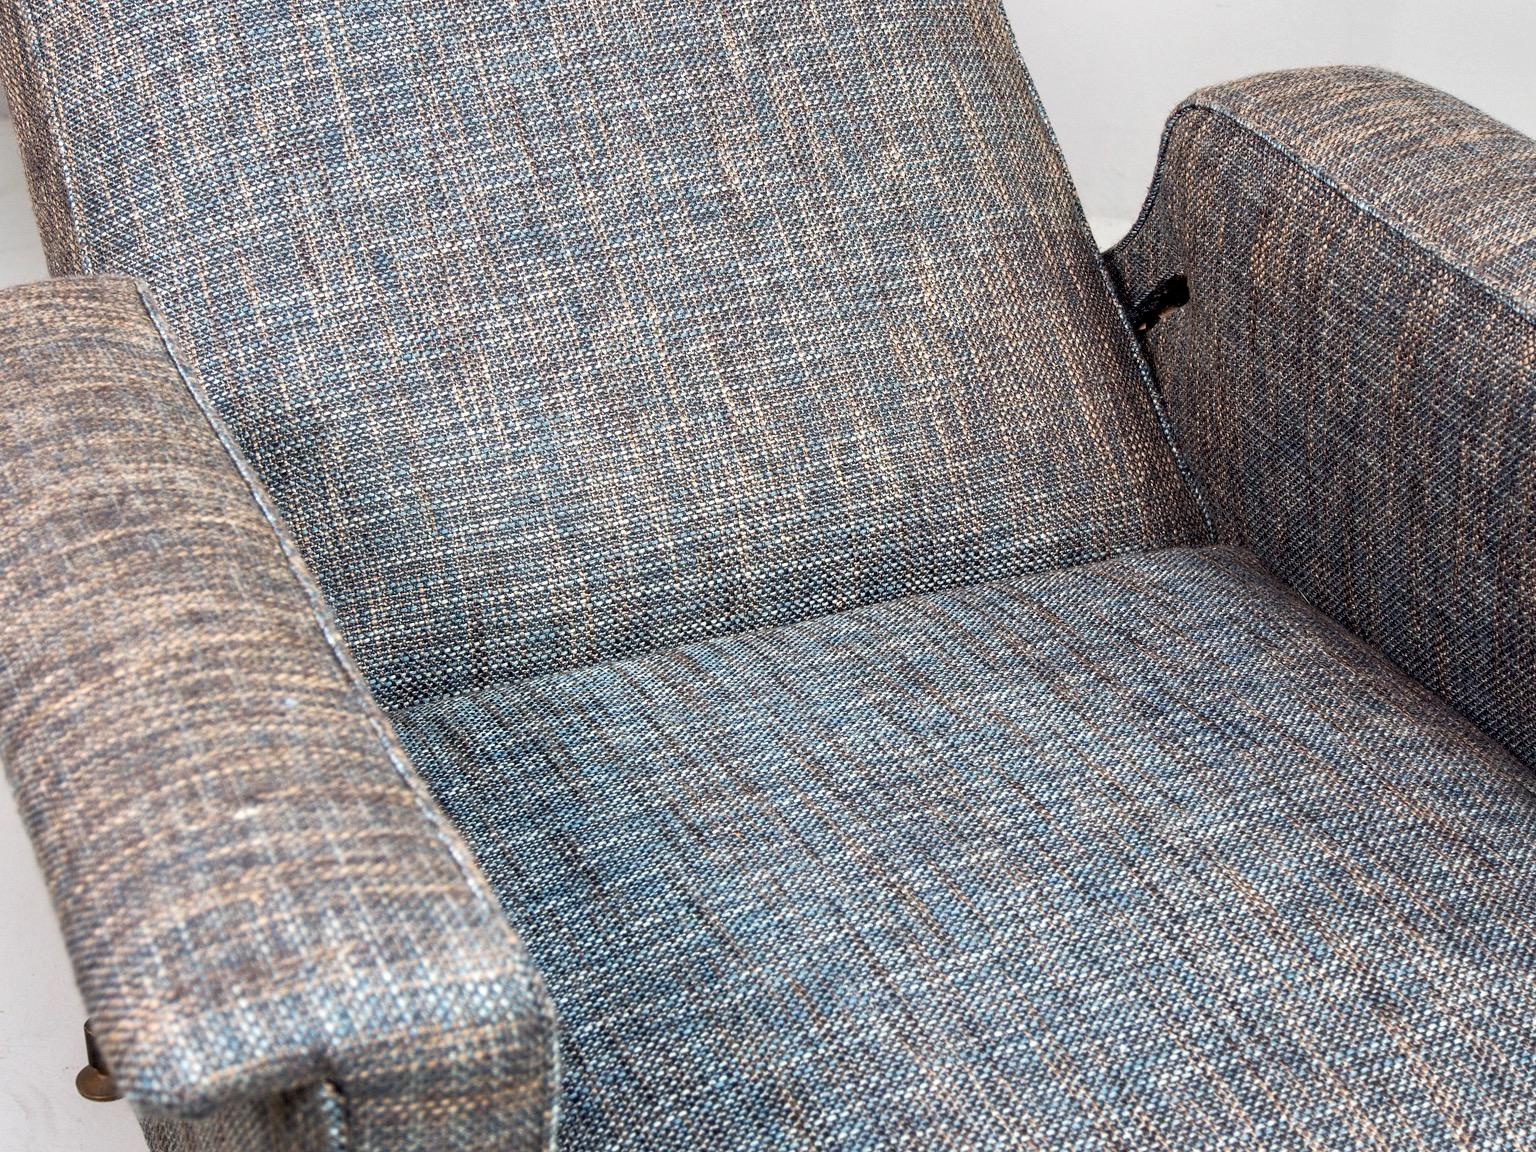 Pair of Italian Midcentury Lounge Chairs with New Tweed Upholstery 1